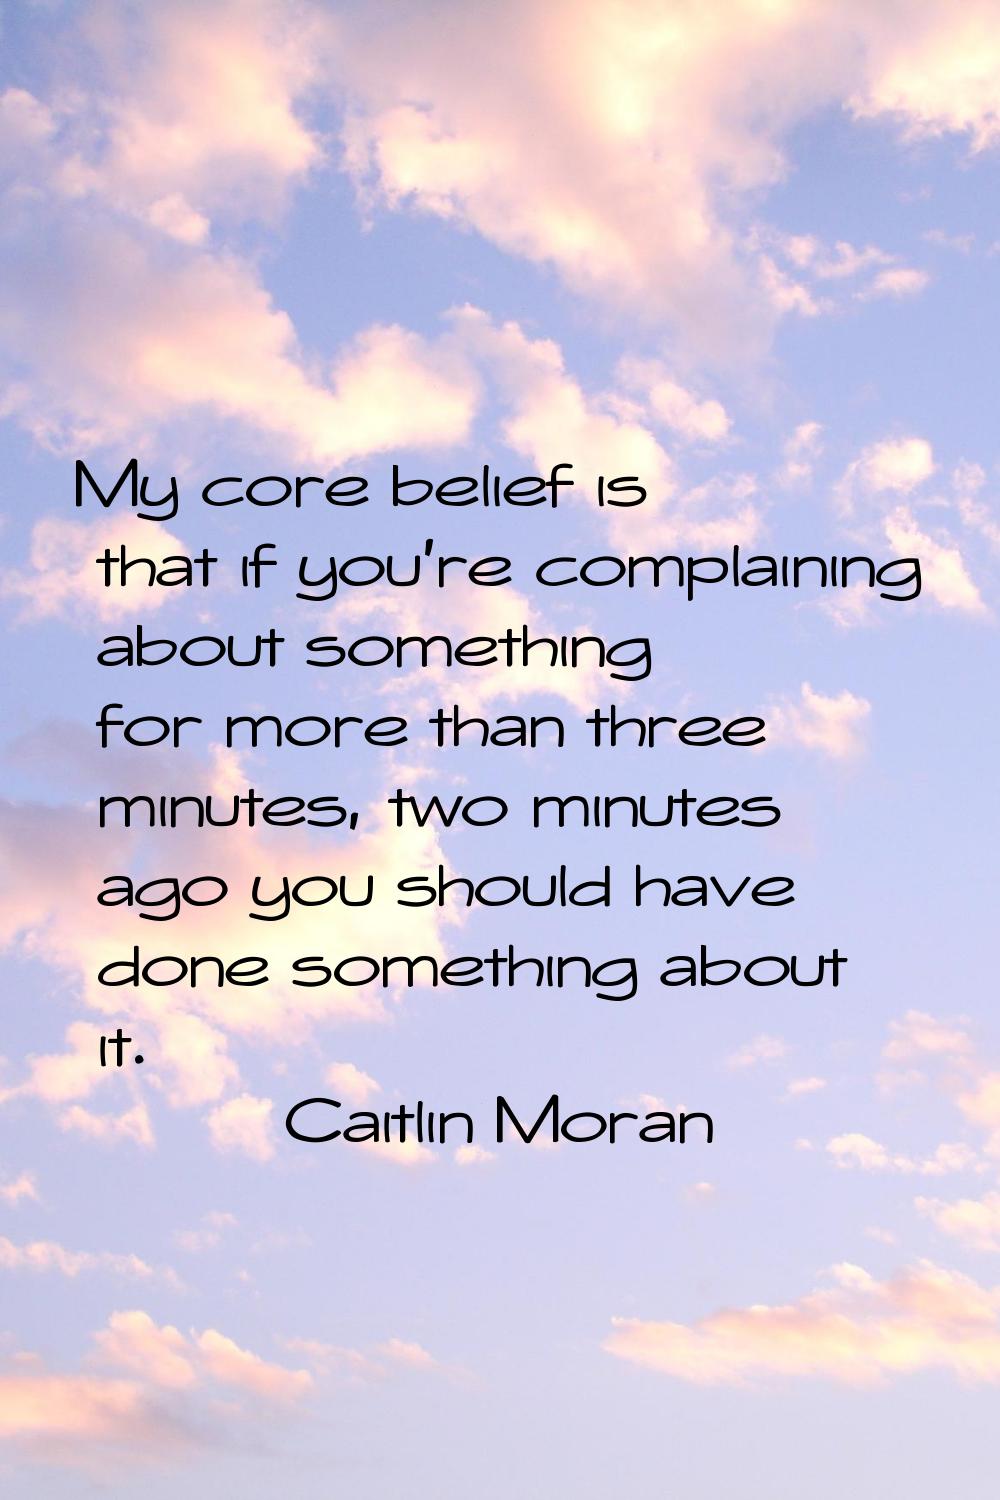 My core belief is that if you're complaining about something for more than three minutes, two minut